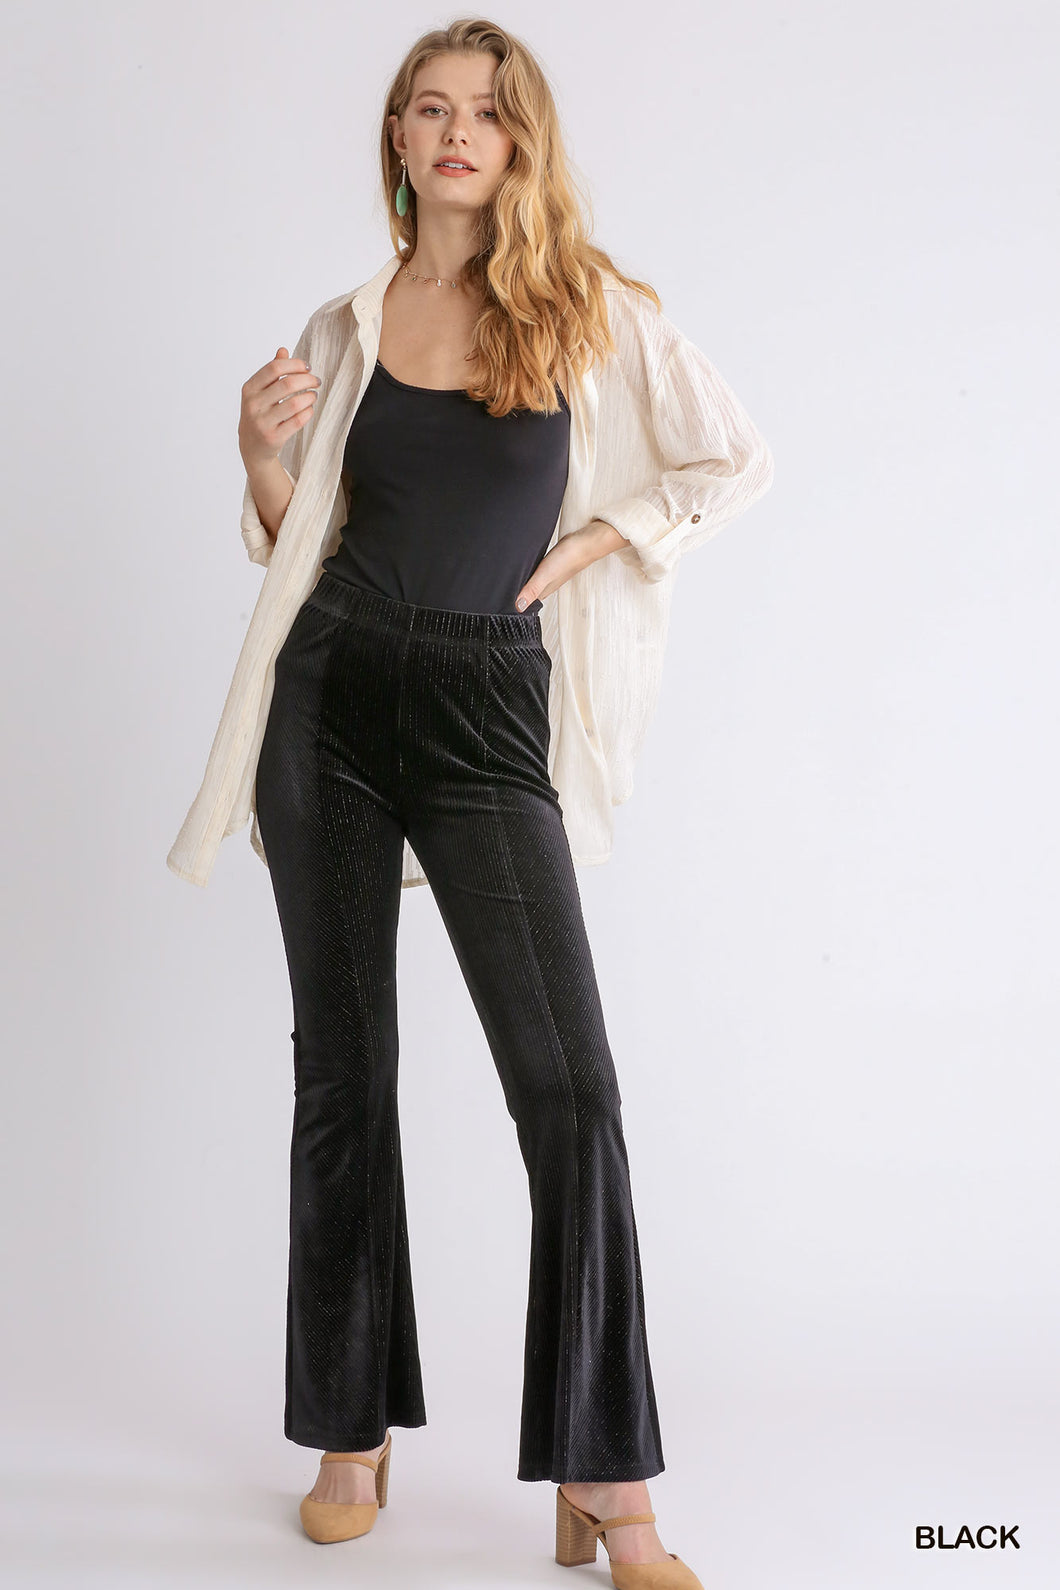 Umgee Knit Pull-On Flare Pant in Black